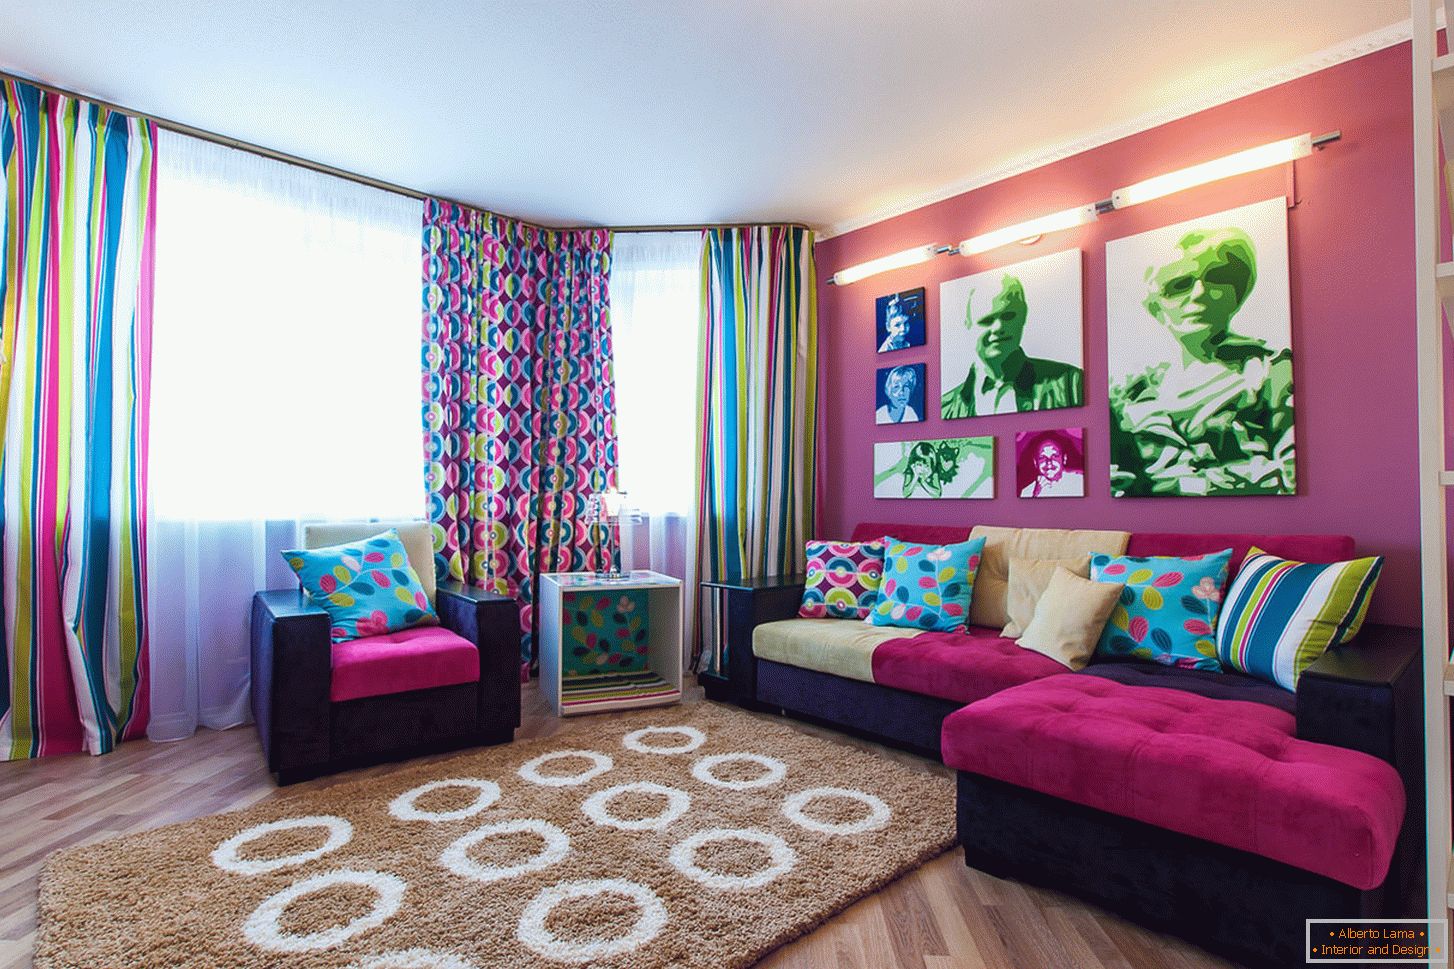 Bright colors in the design of the living room